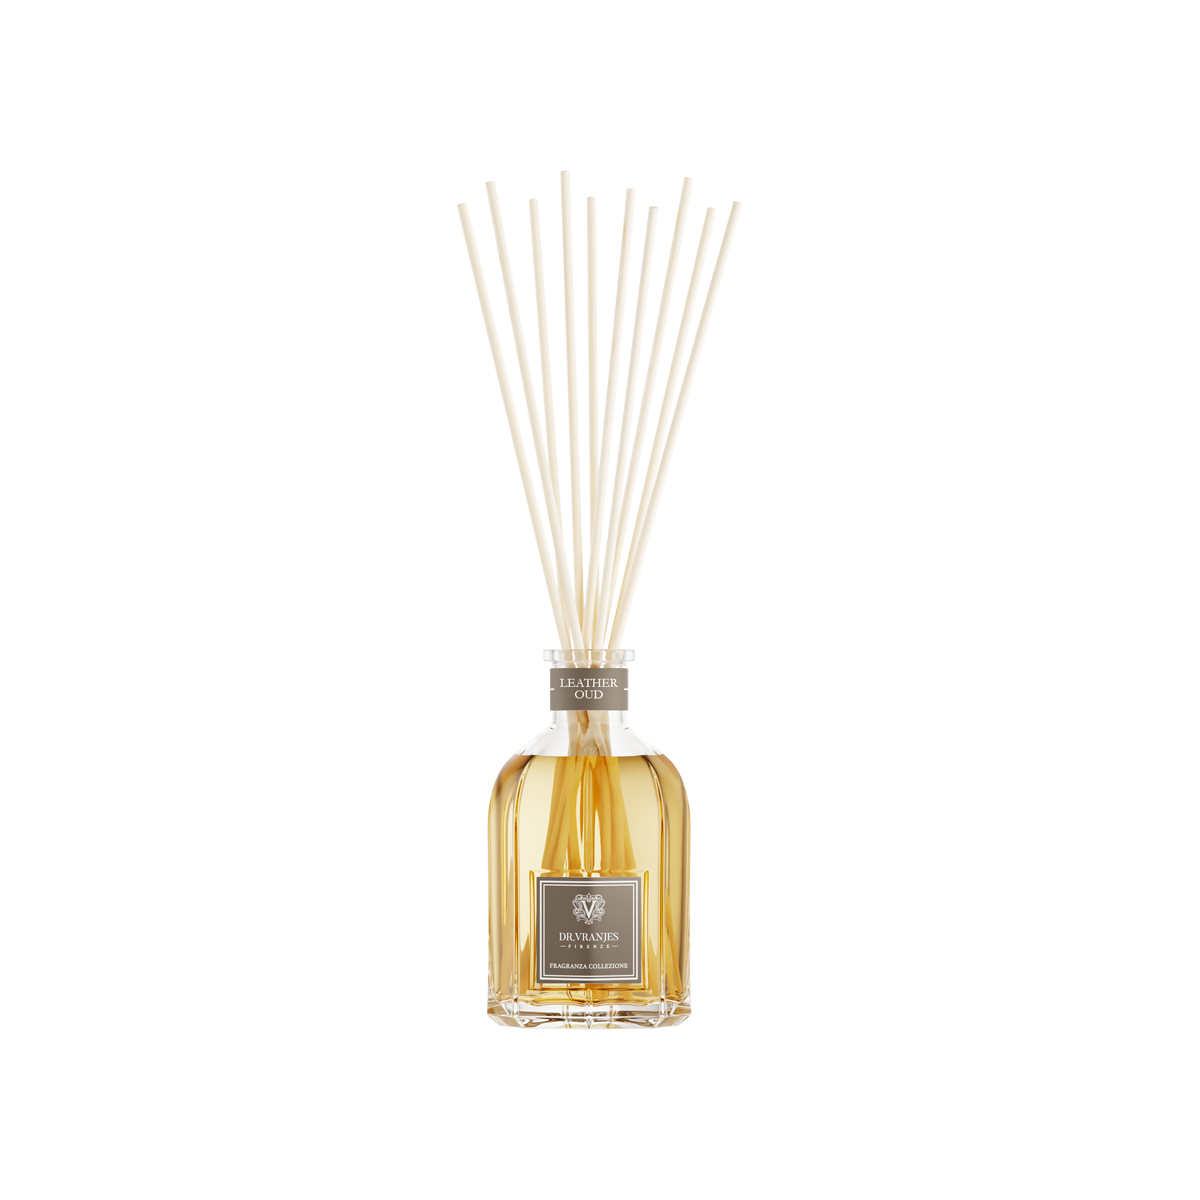 Dr. Vranjes Firenze - Leather Oud Diffuser